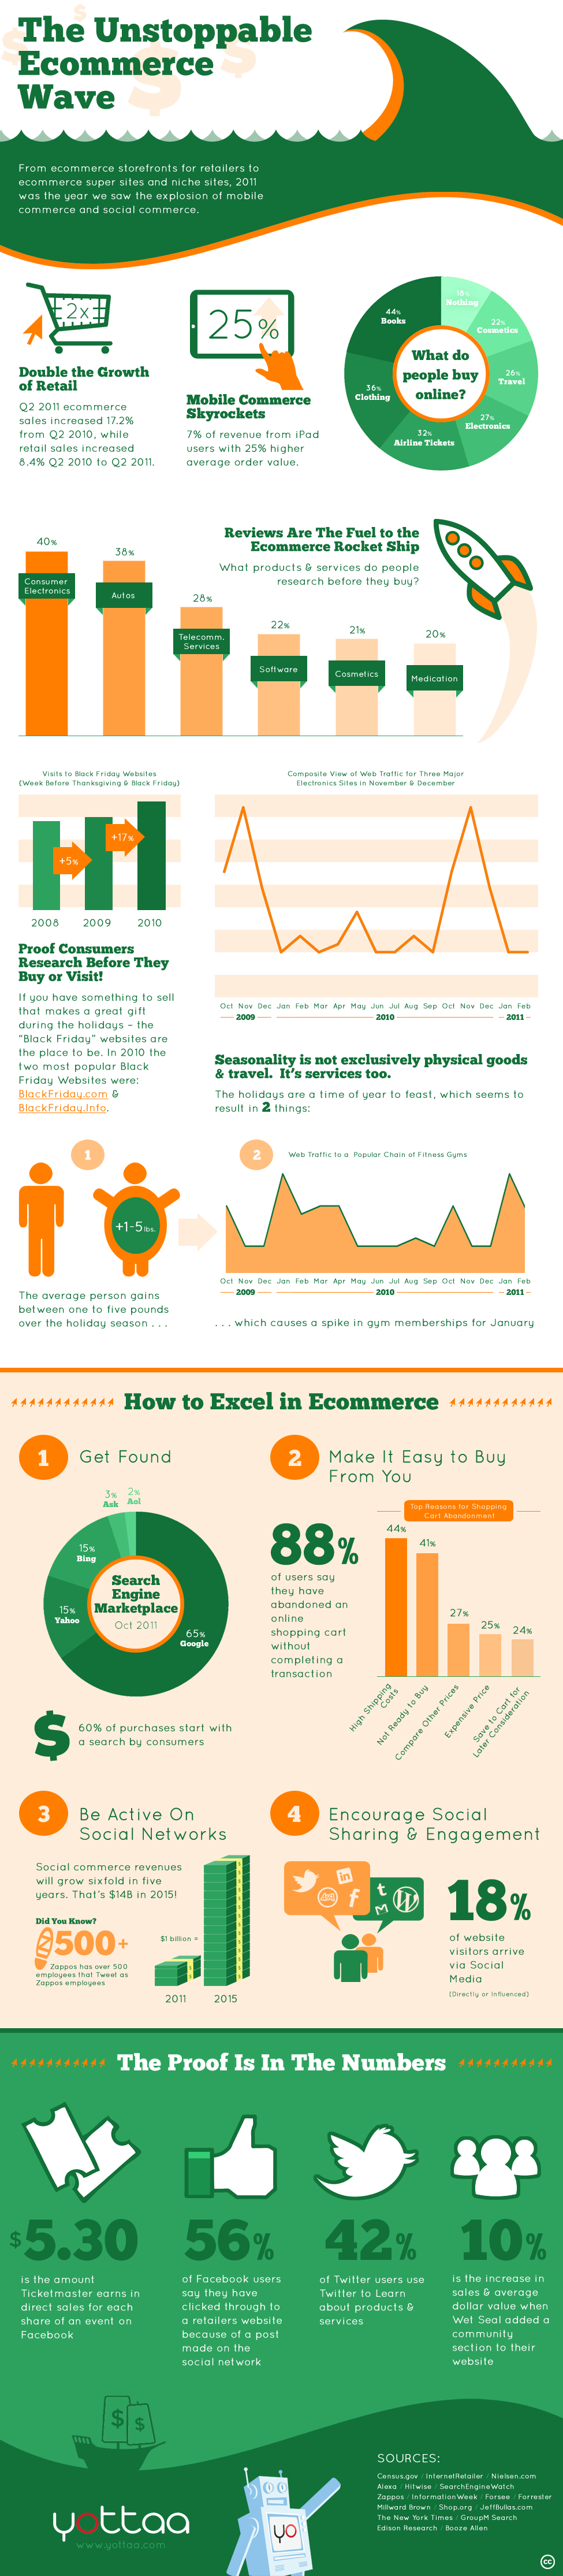 The Unstoppable Ecommerce Wave Infographic